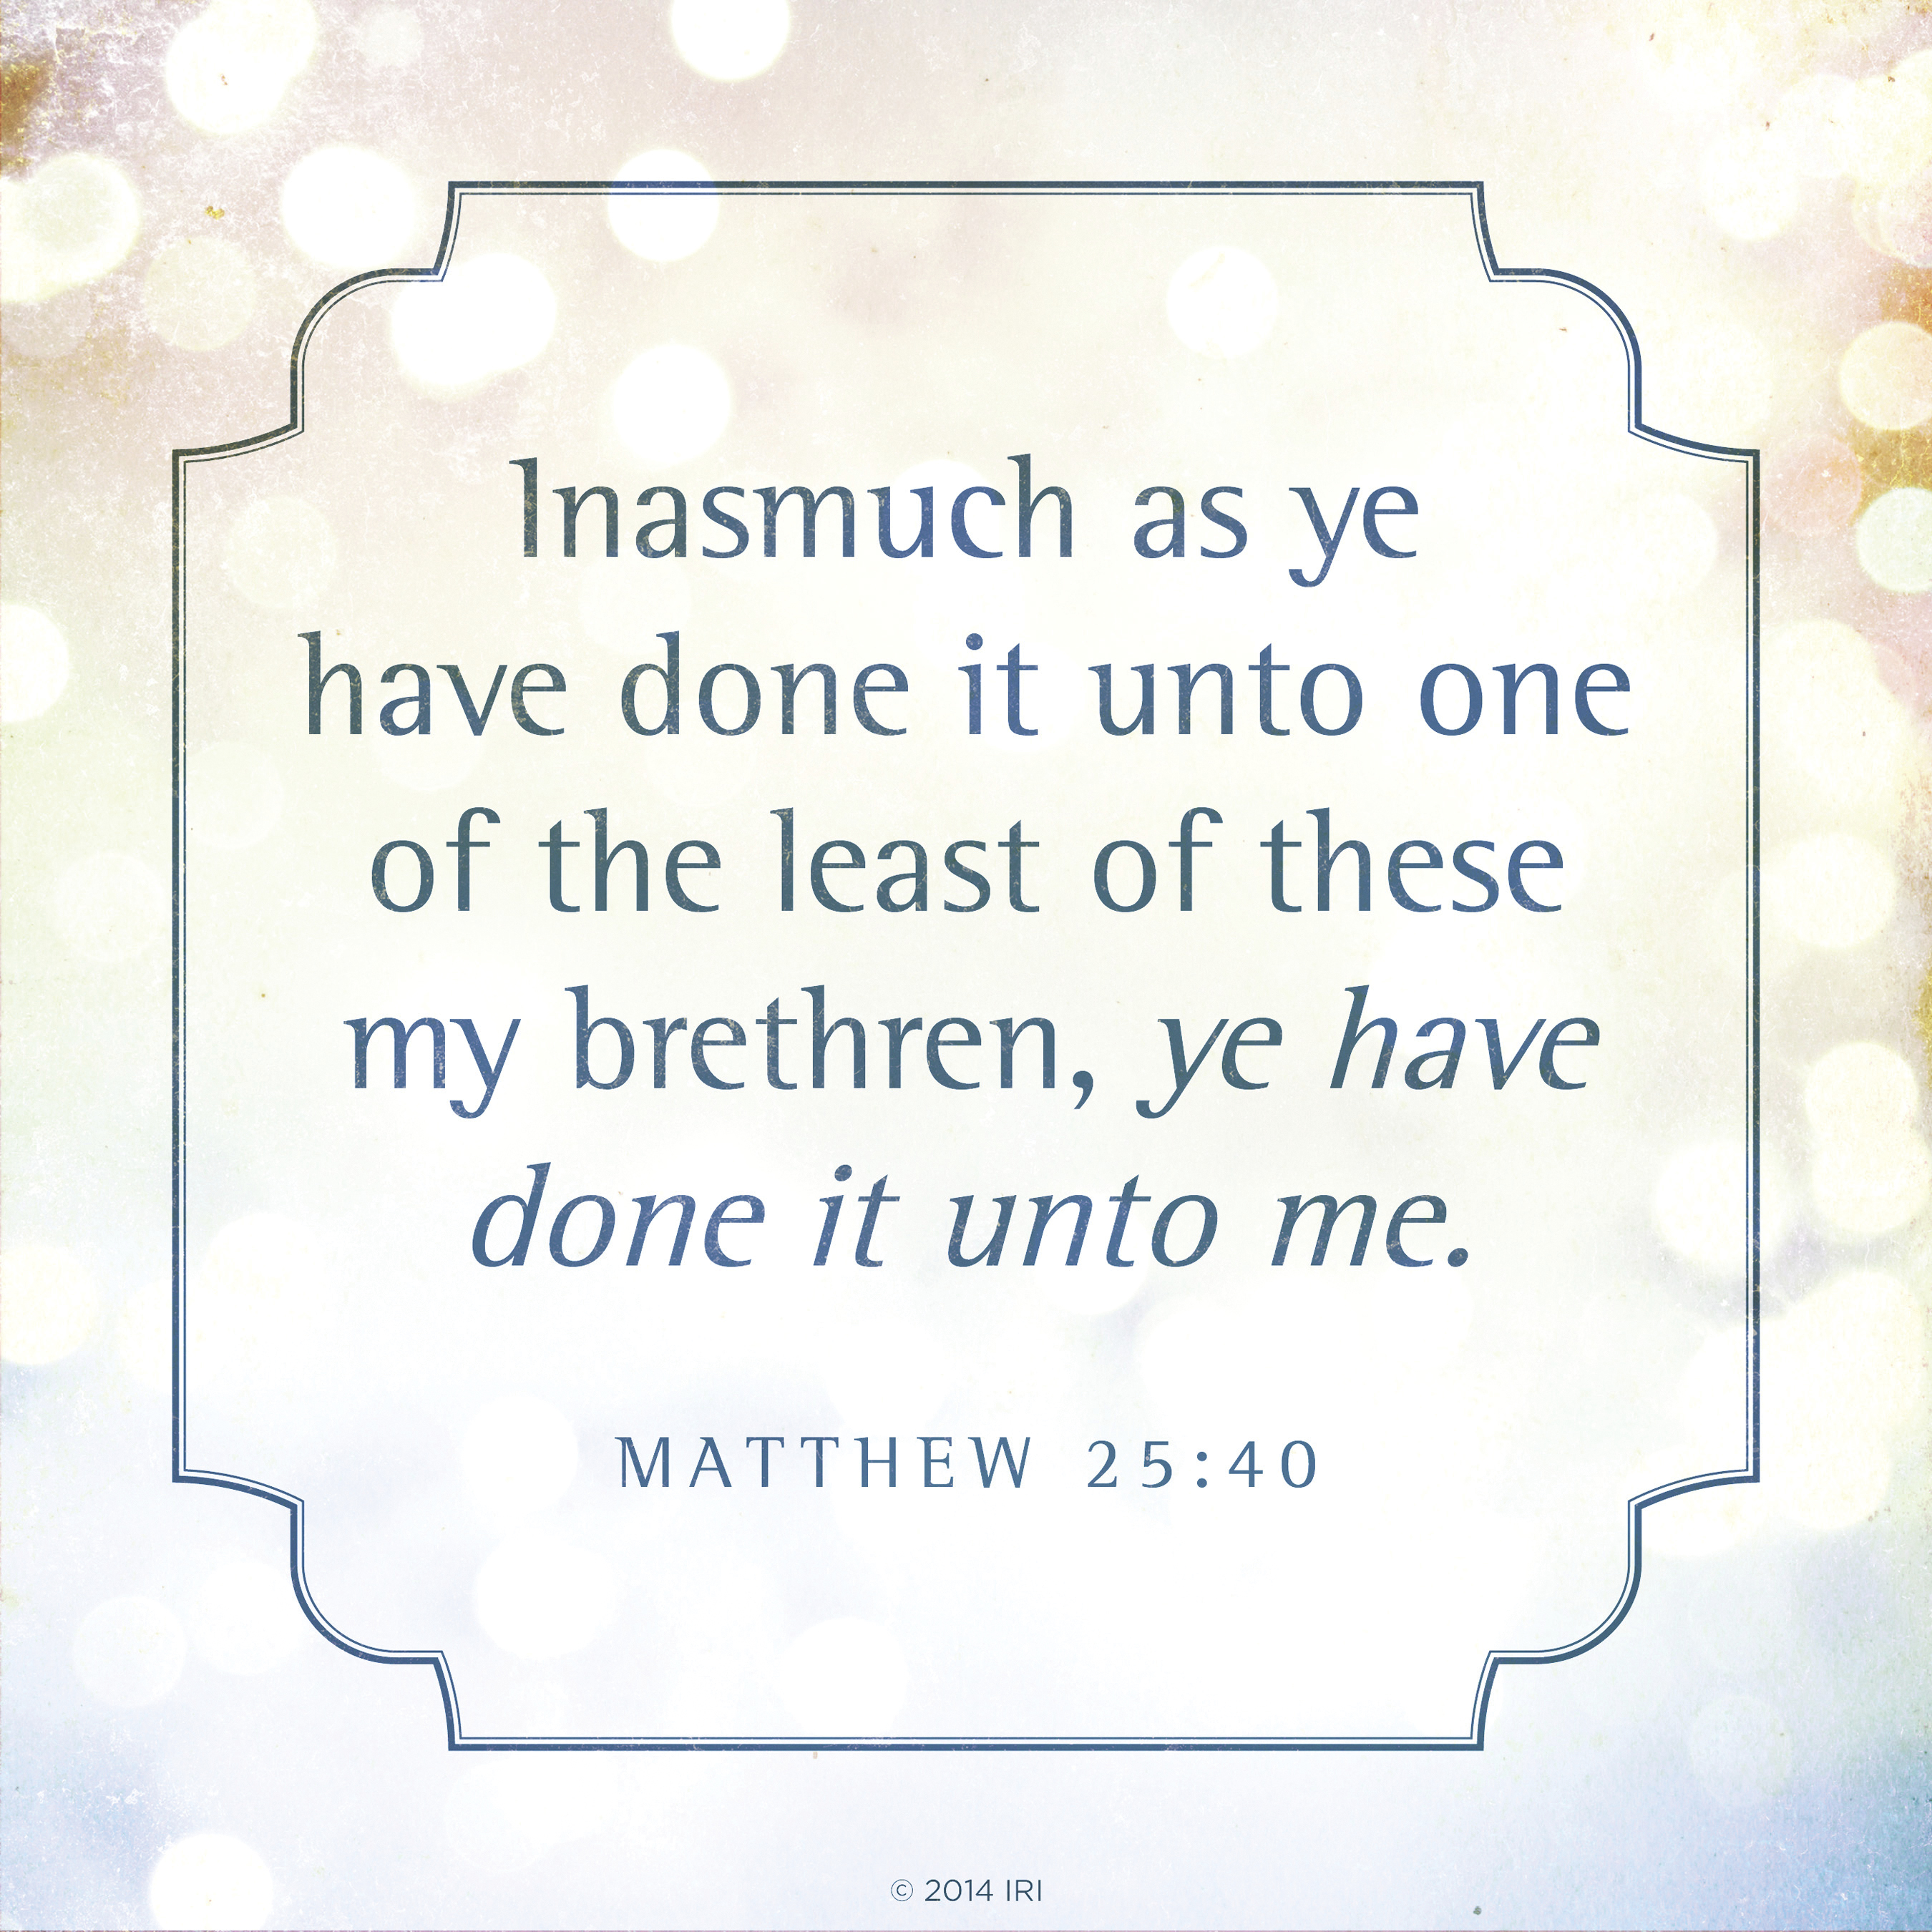 "Inasmuch as ye have done it unto one of the least of these my brethre...